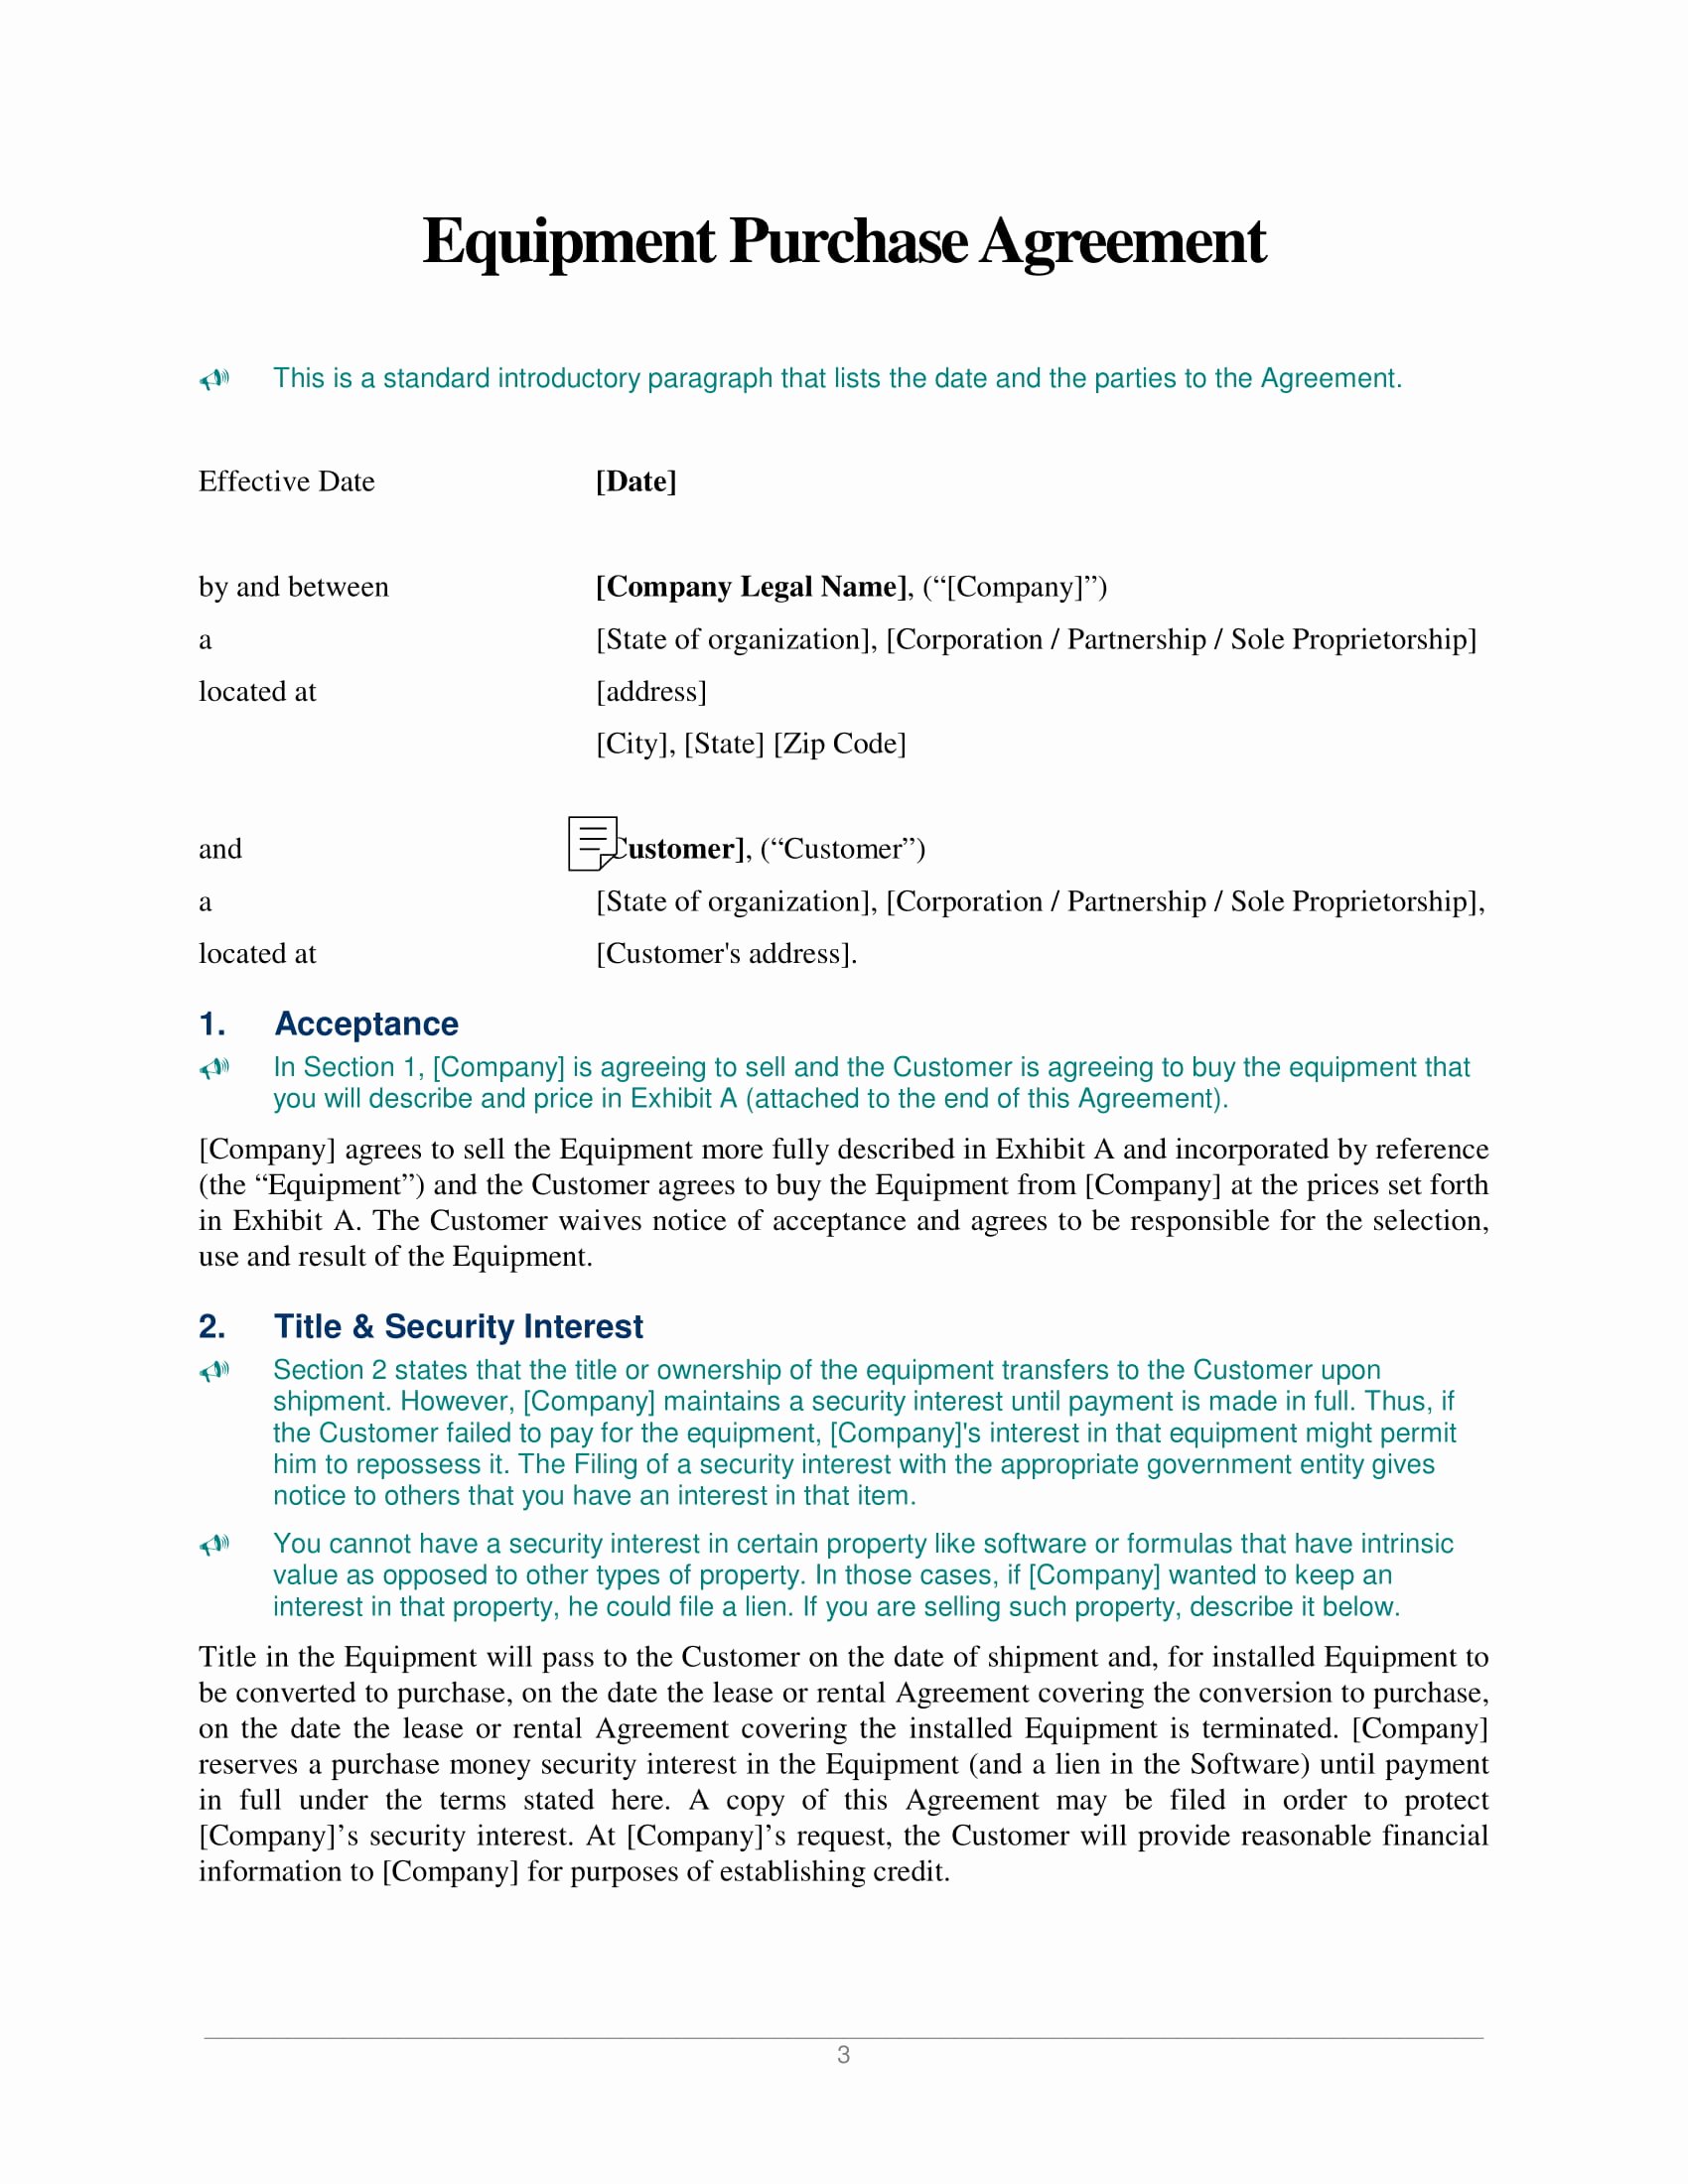 Equipment Purchase Agreement Template Lovely 10 Equipment Purchase Agreement Examples Pdf